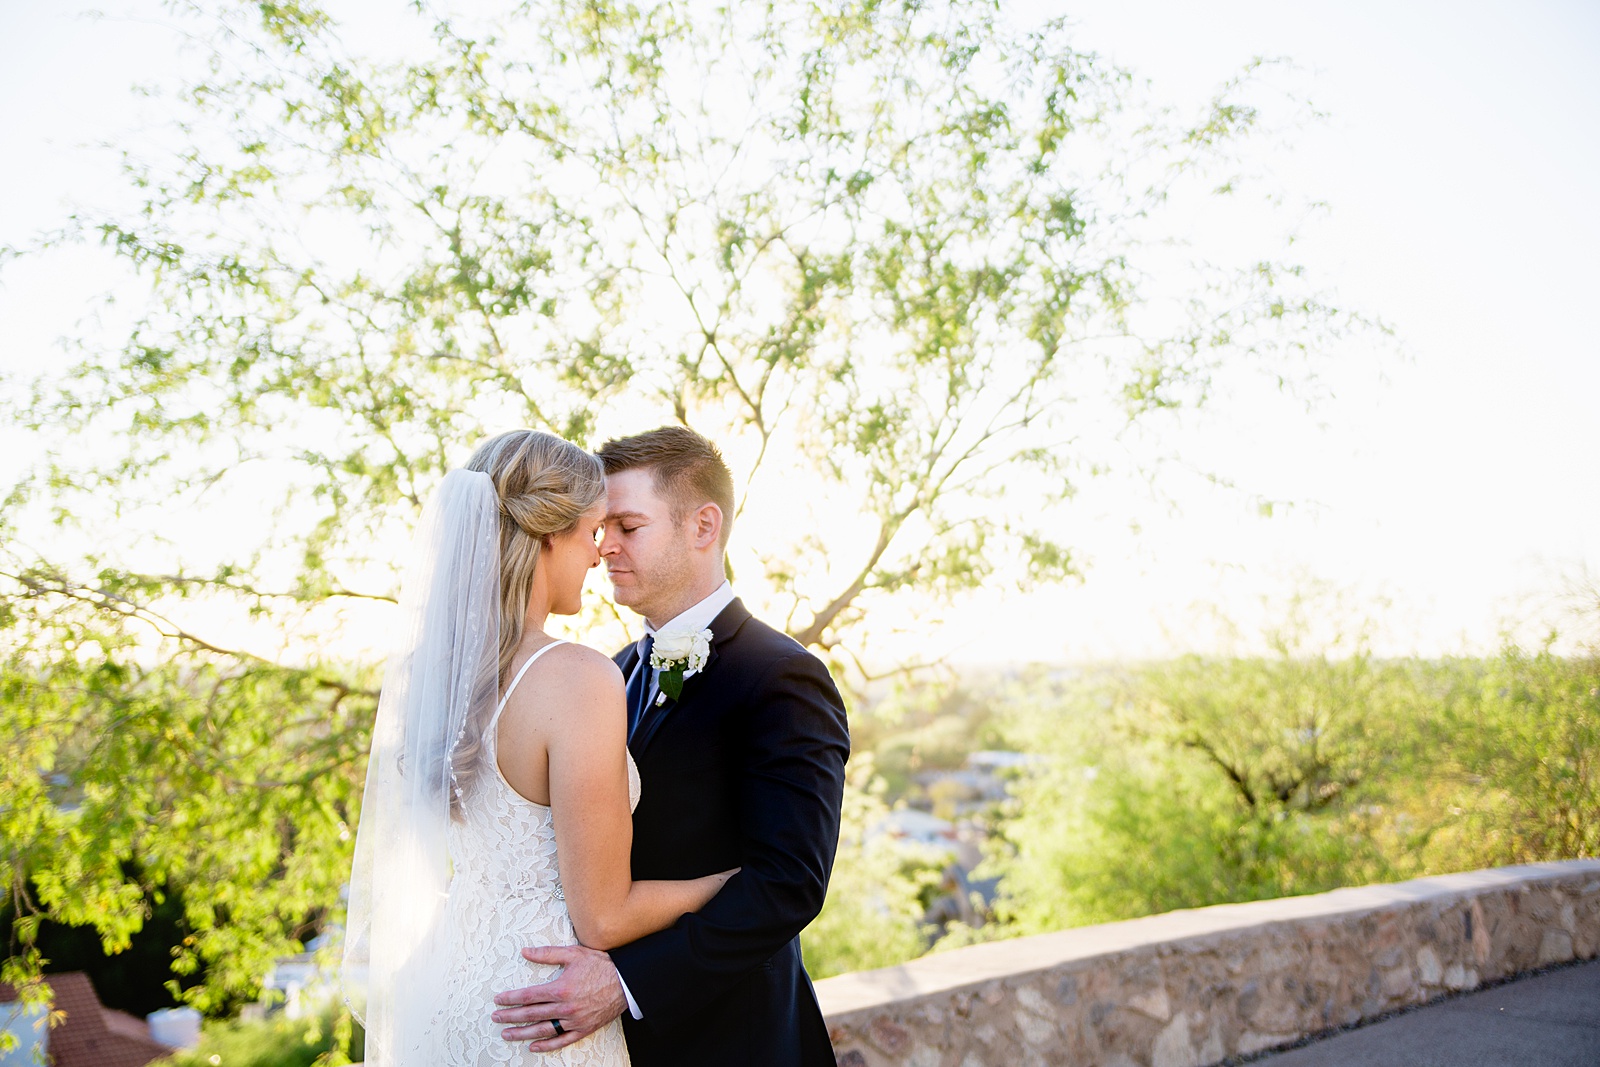 Bride and Groom share an intimate moment during their Wrigley Mansion wedding by Phoenix wedding photographer PMA Photography.